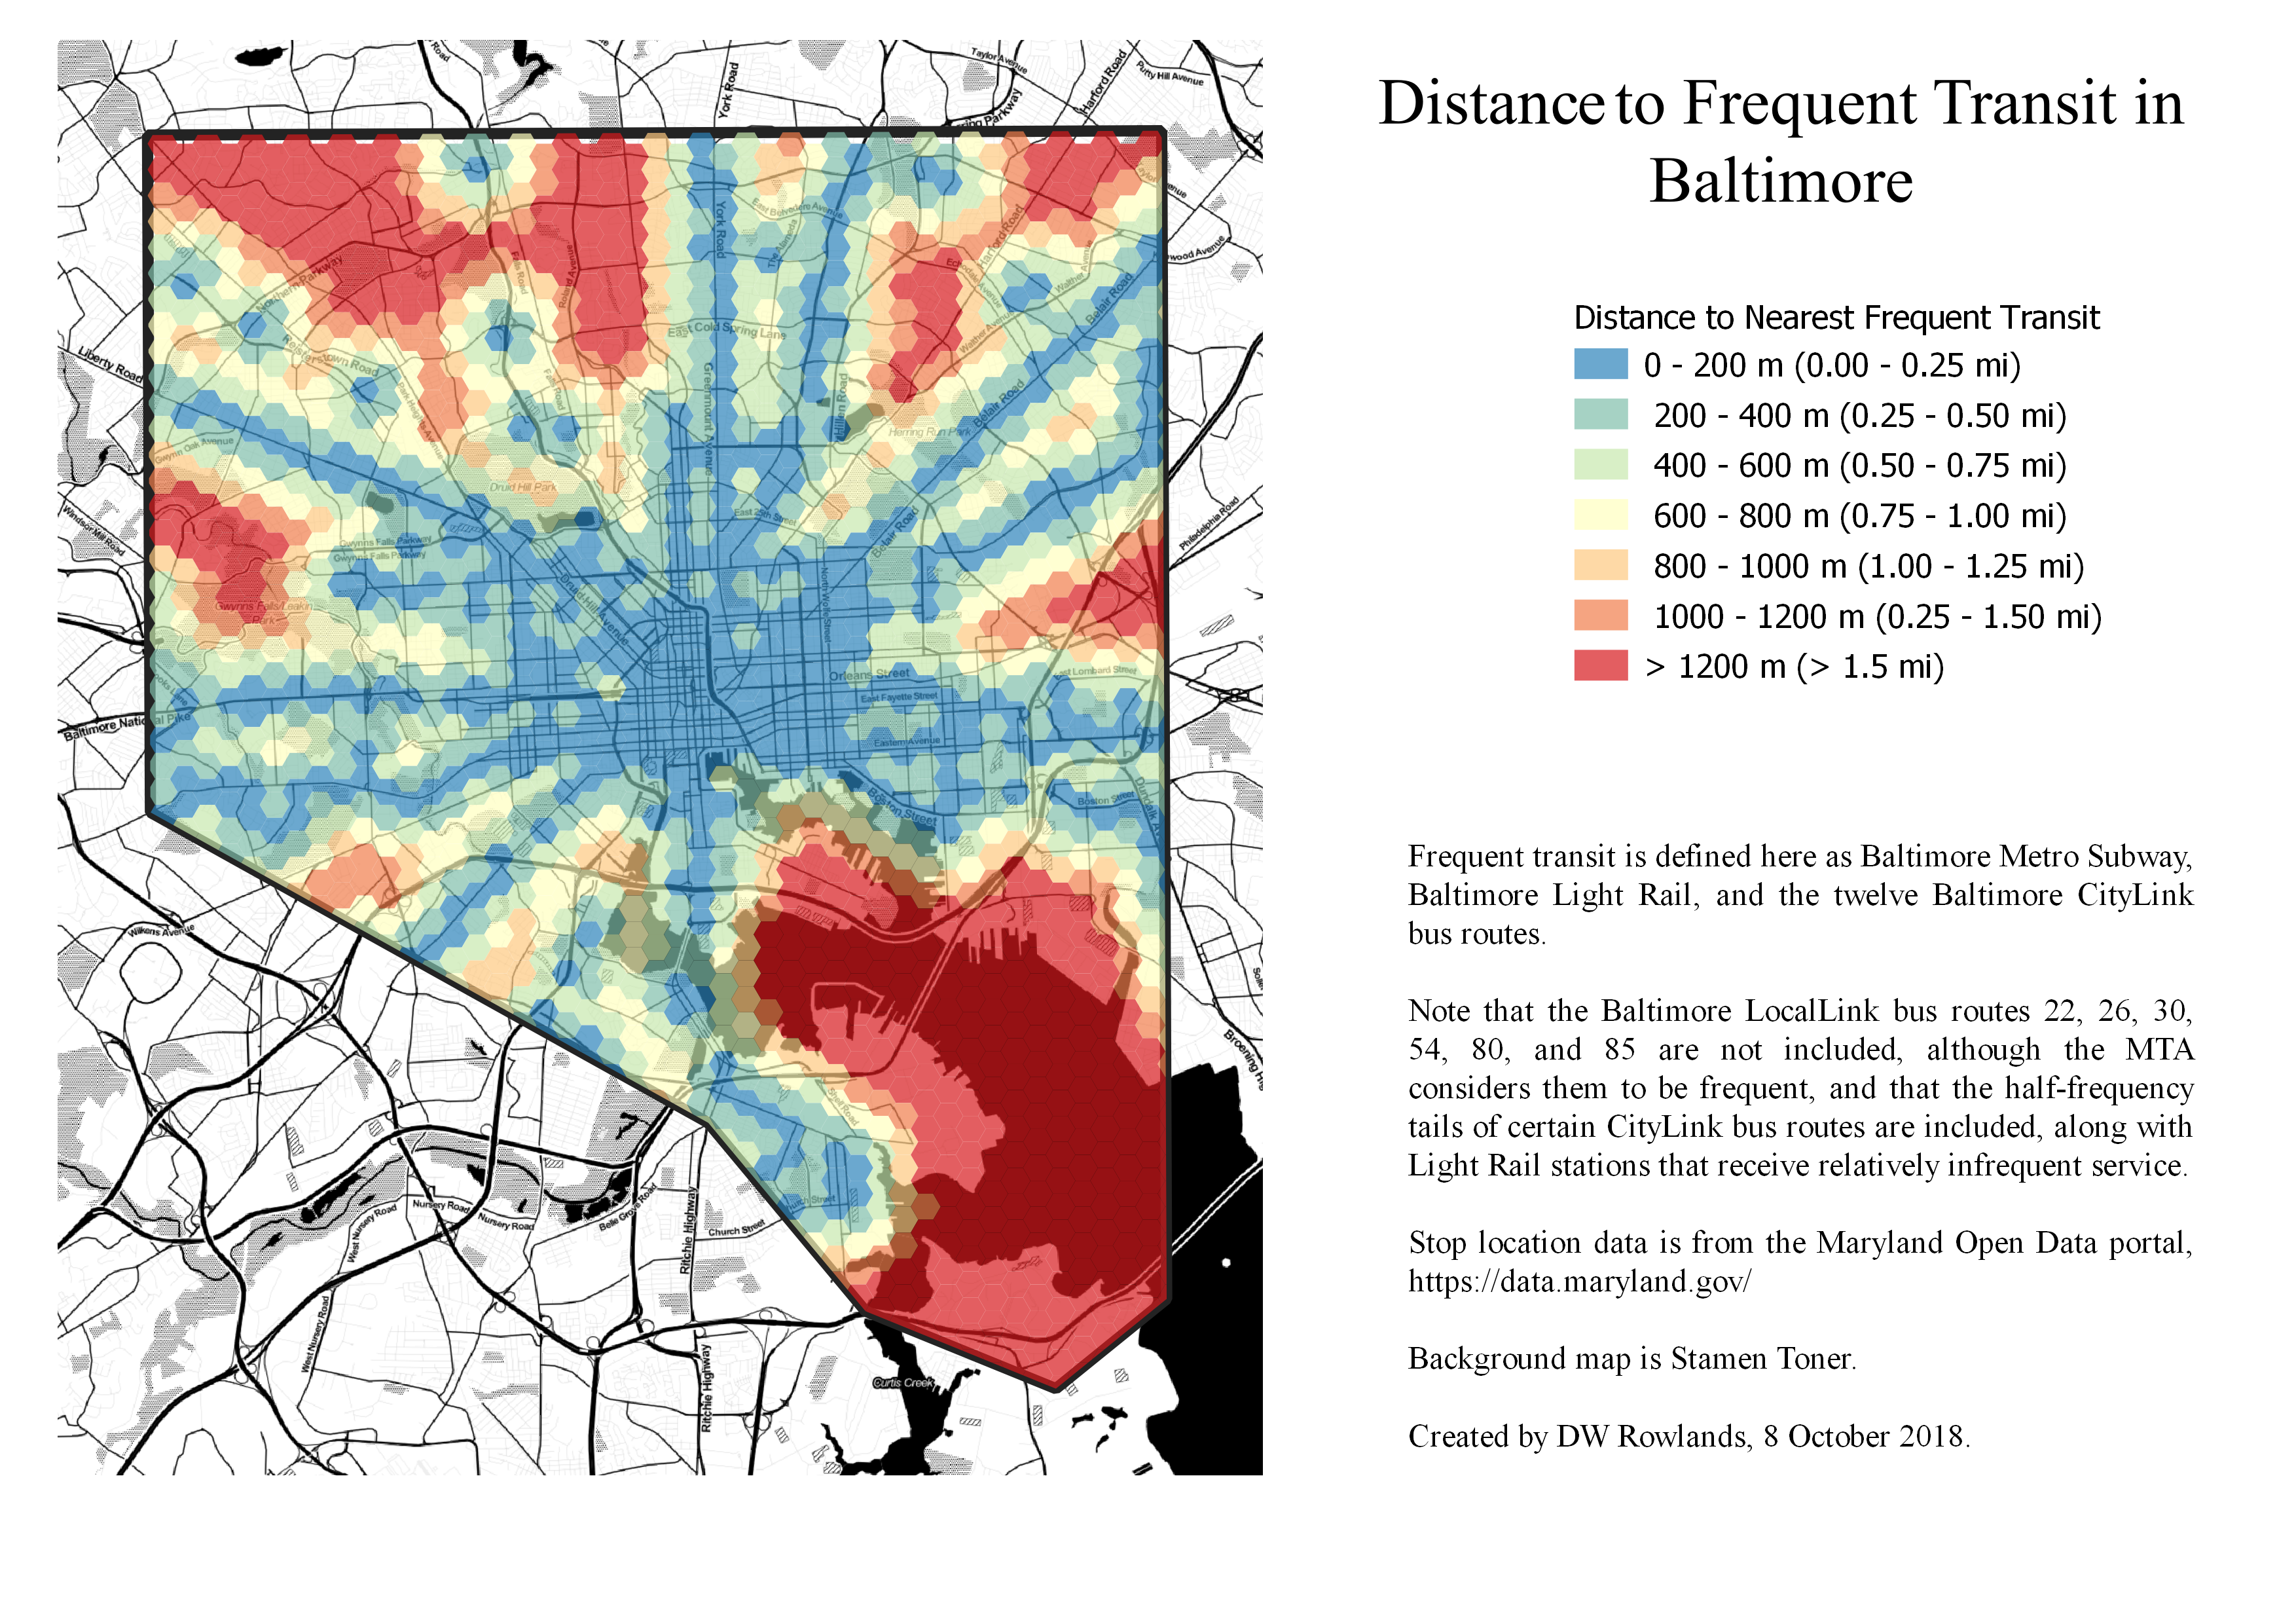 Map of distance from frequent transit in Baltimore City